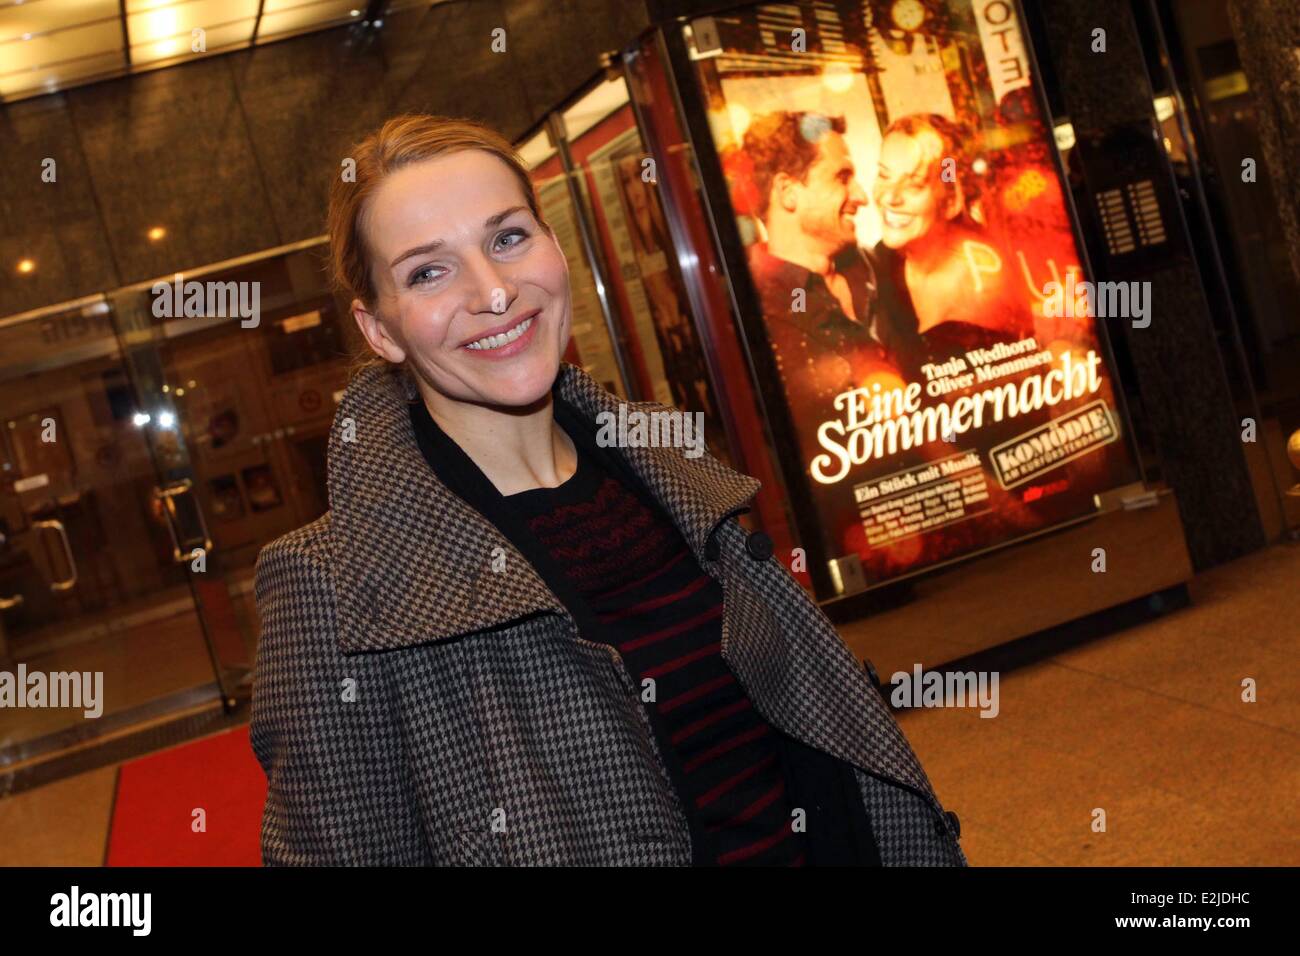 Tanja Wedhorn at a portrait session at Komödie am Ku'Damm theatre where the actress is currently playing Eine Sommernacht.  Where: Berlin, Berlin, Germany When: 25 Feb 2013 Stock Photo